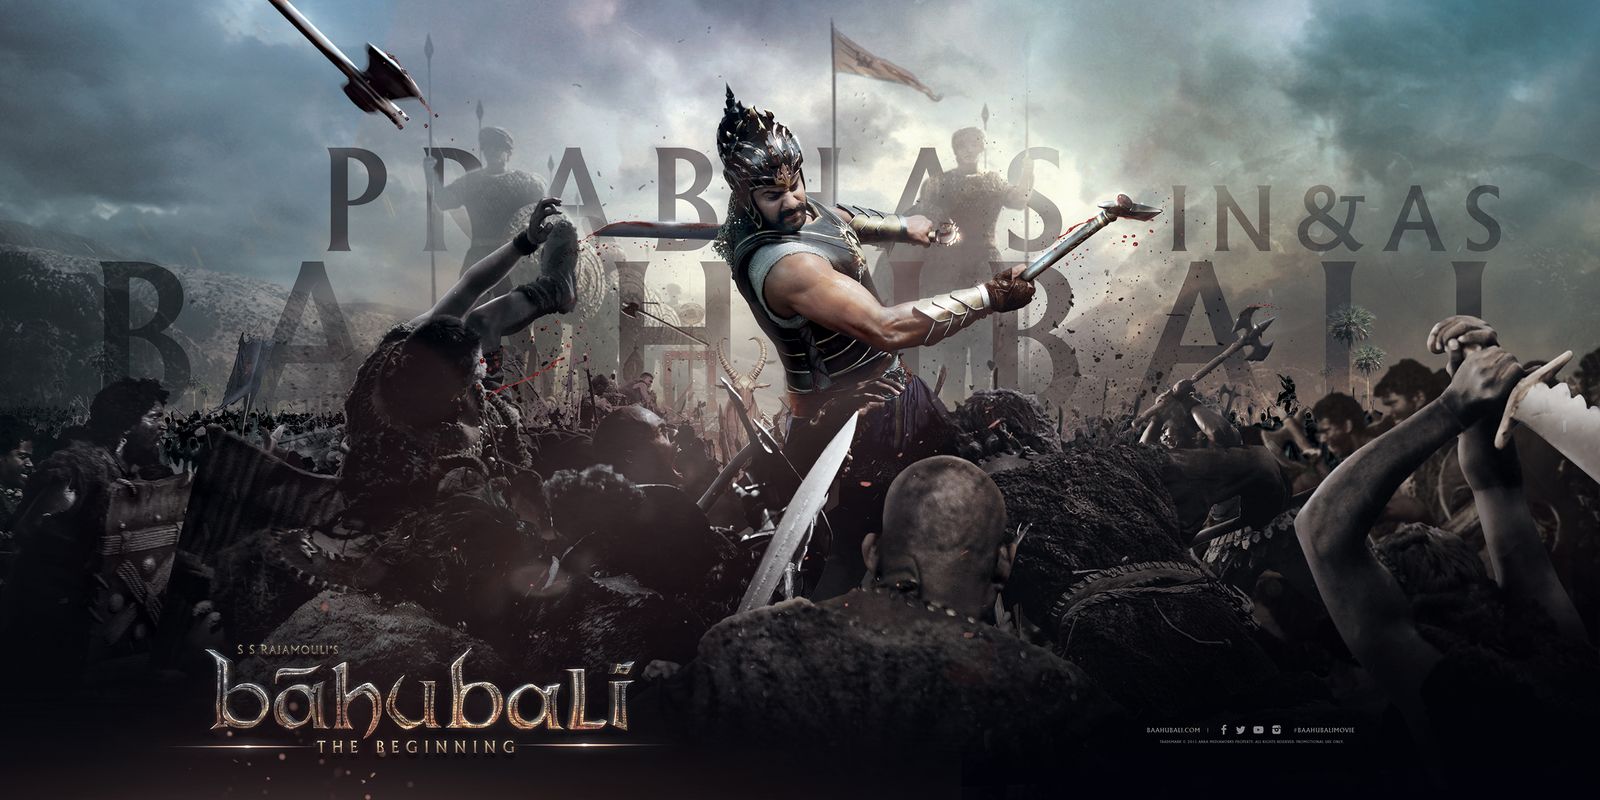 5 Aspects That Made Baahubali India’s Biggest Cinematic Possession 